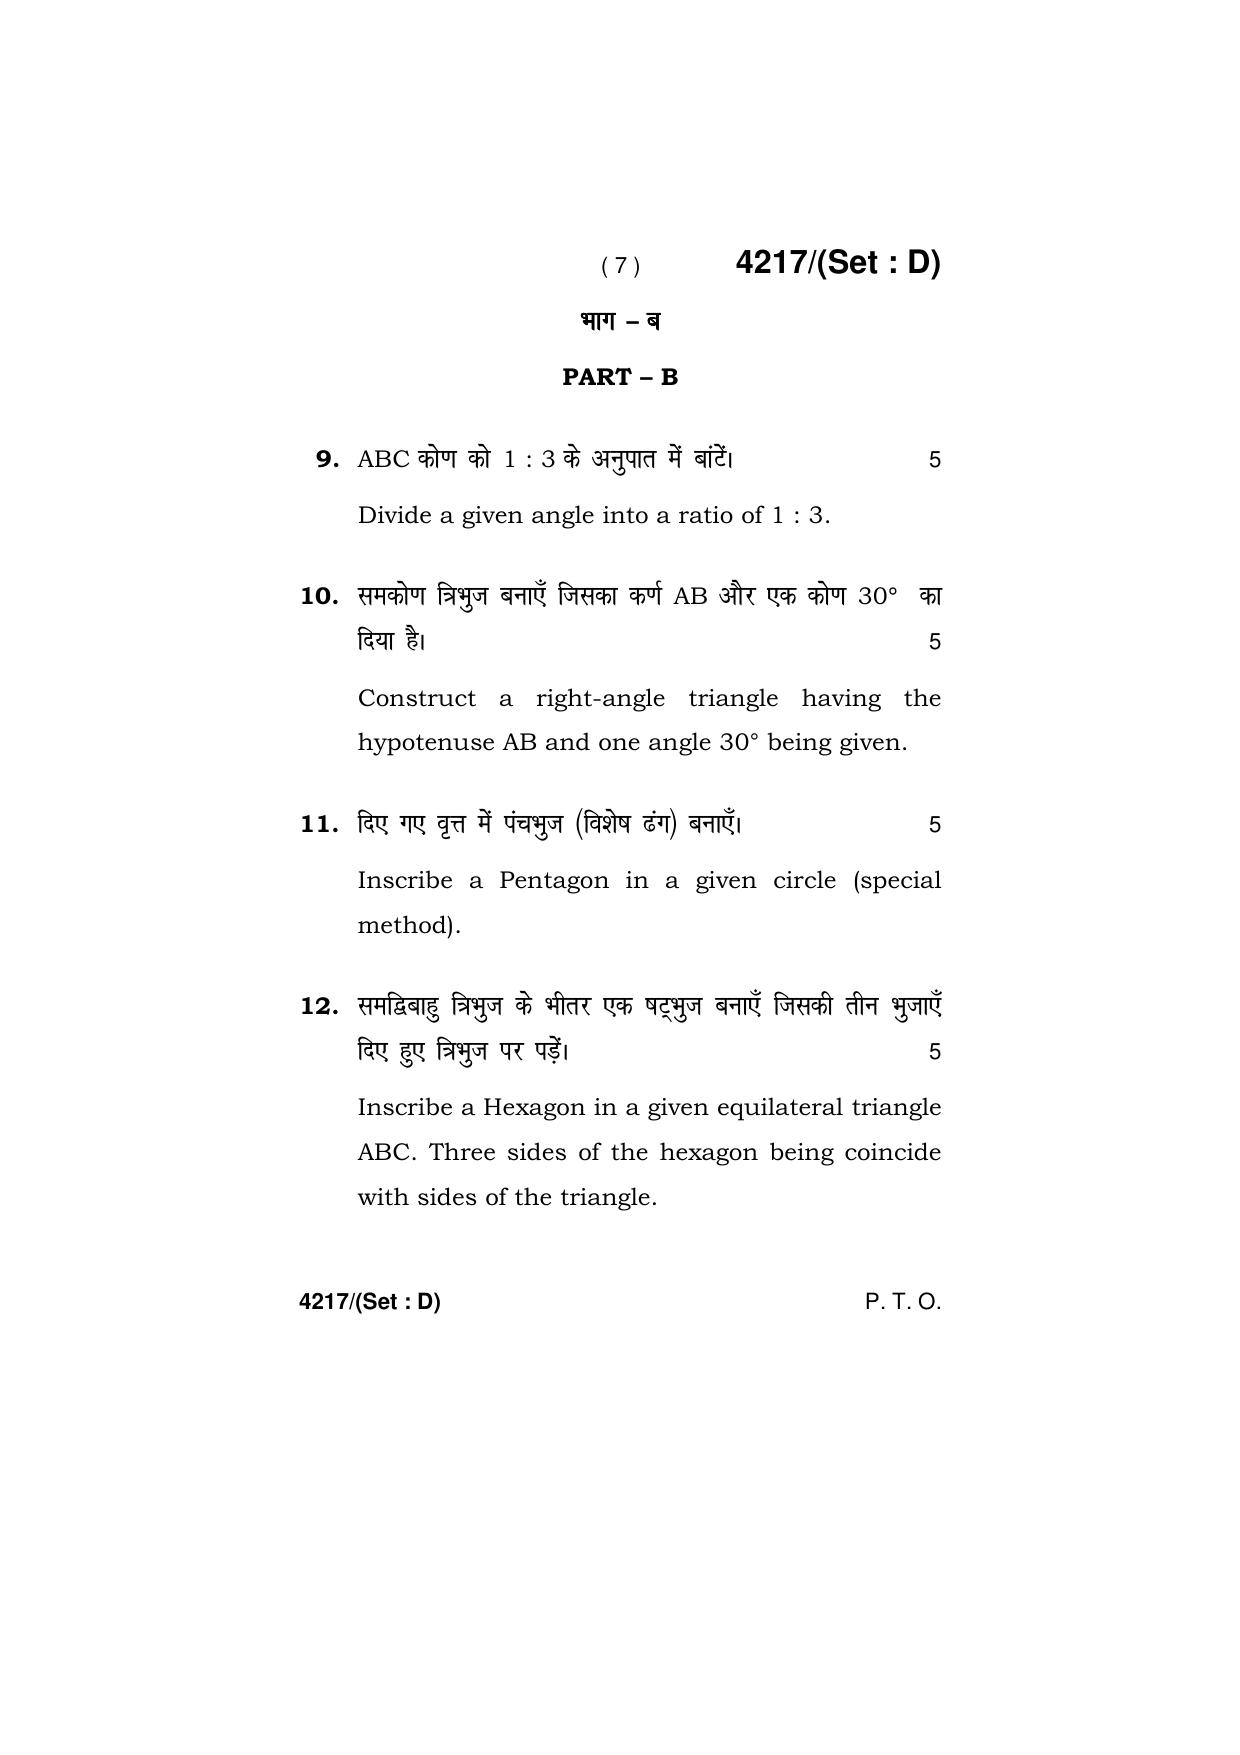 Haryana Board HBSE Class 10 Drawing (All Set) 2019 Question Paper - Page 31